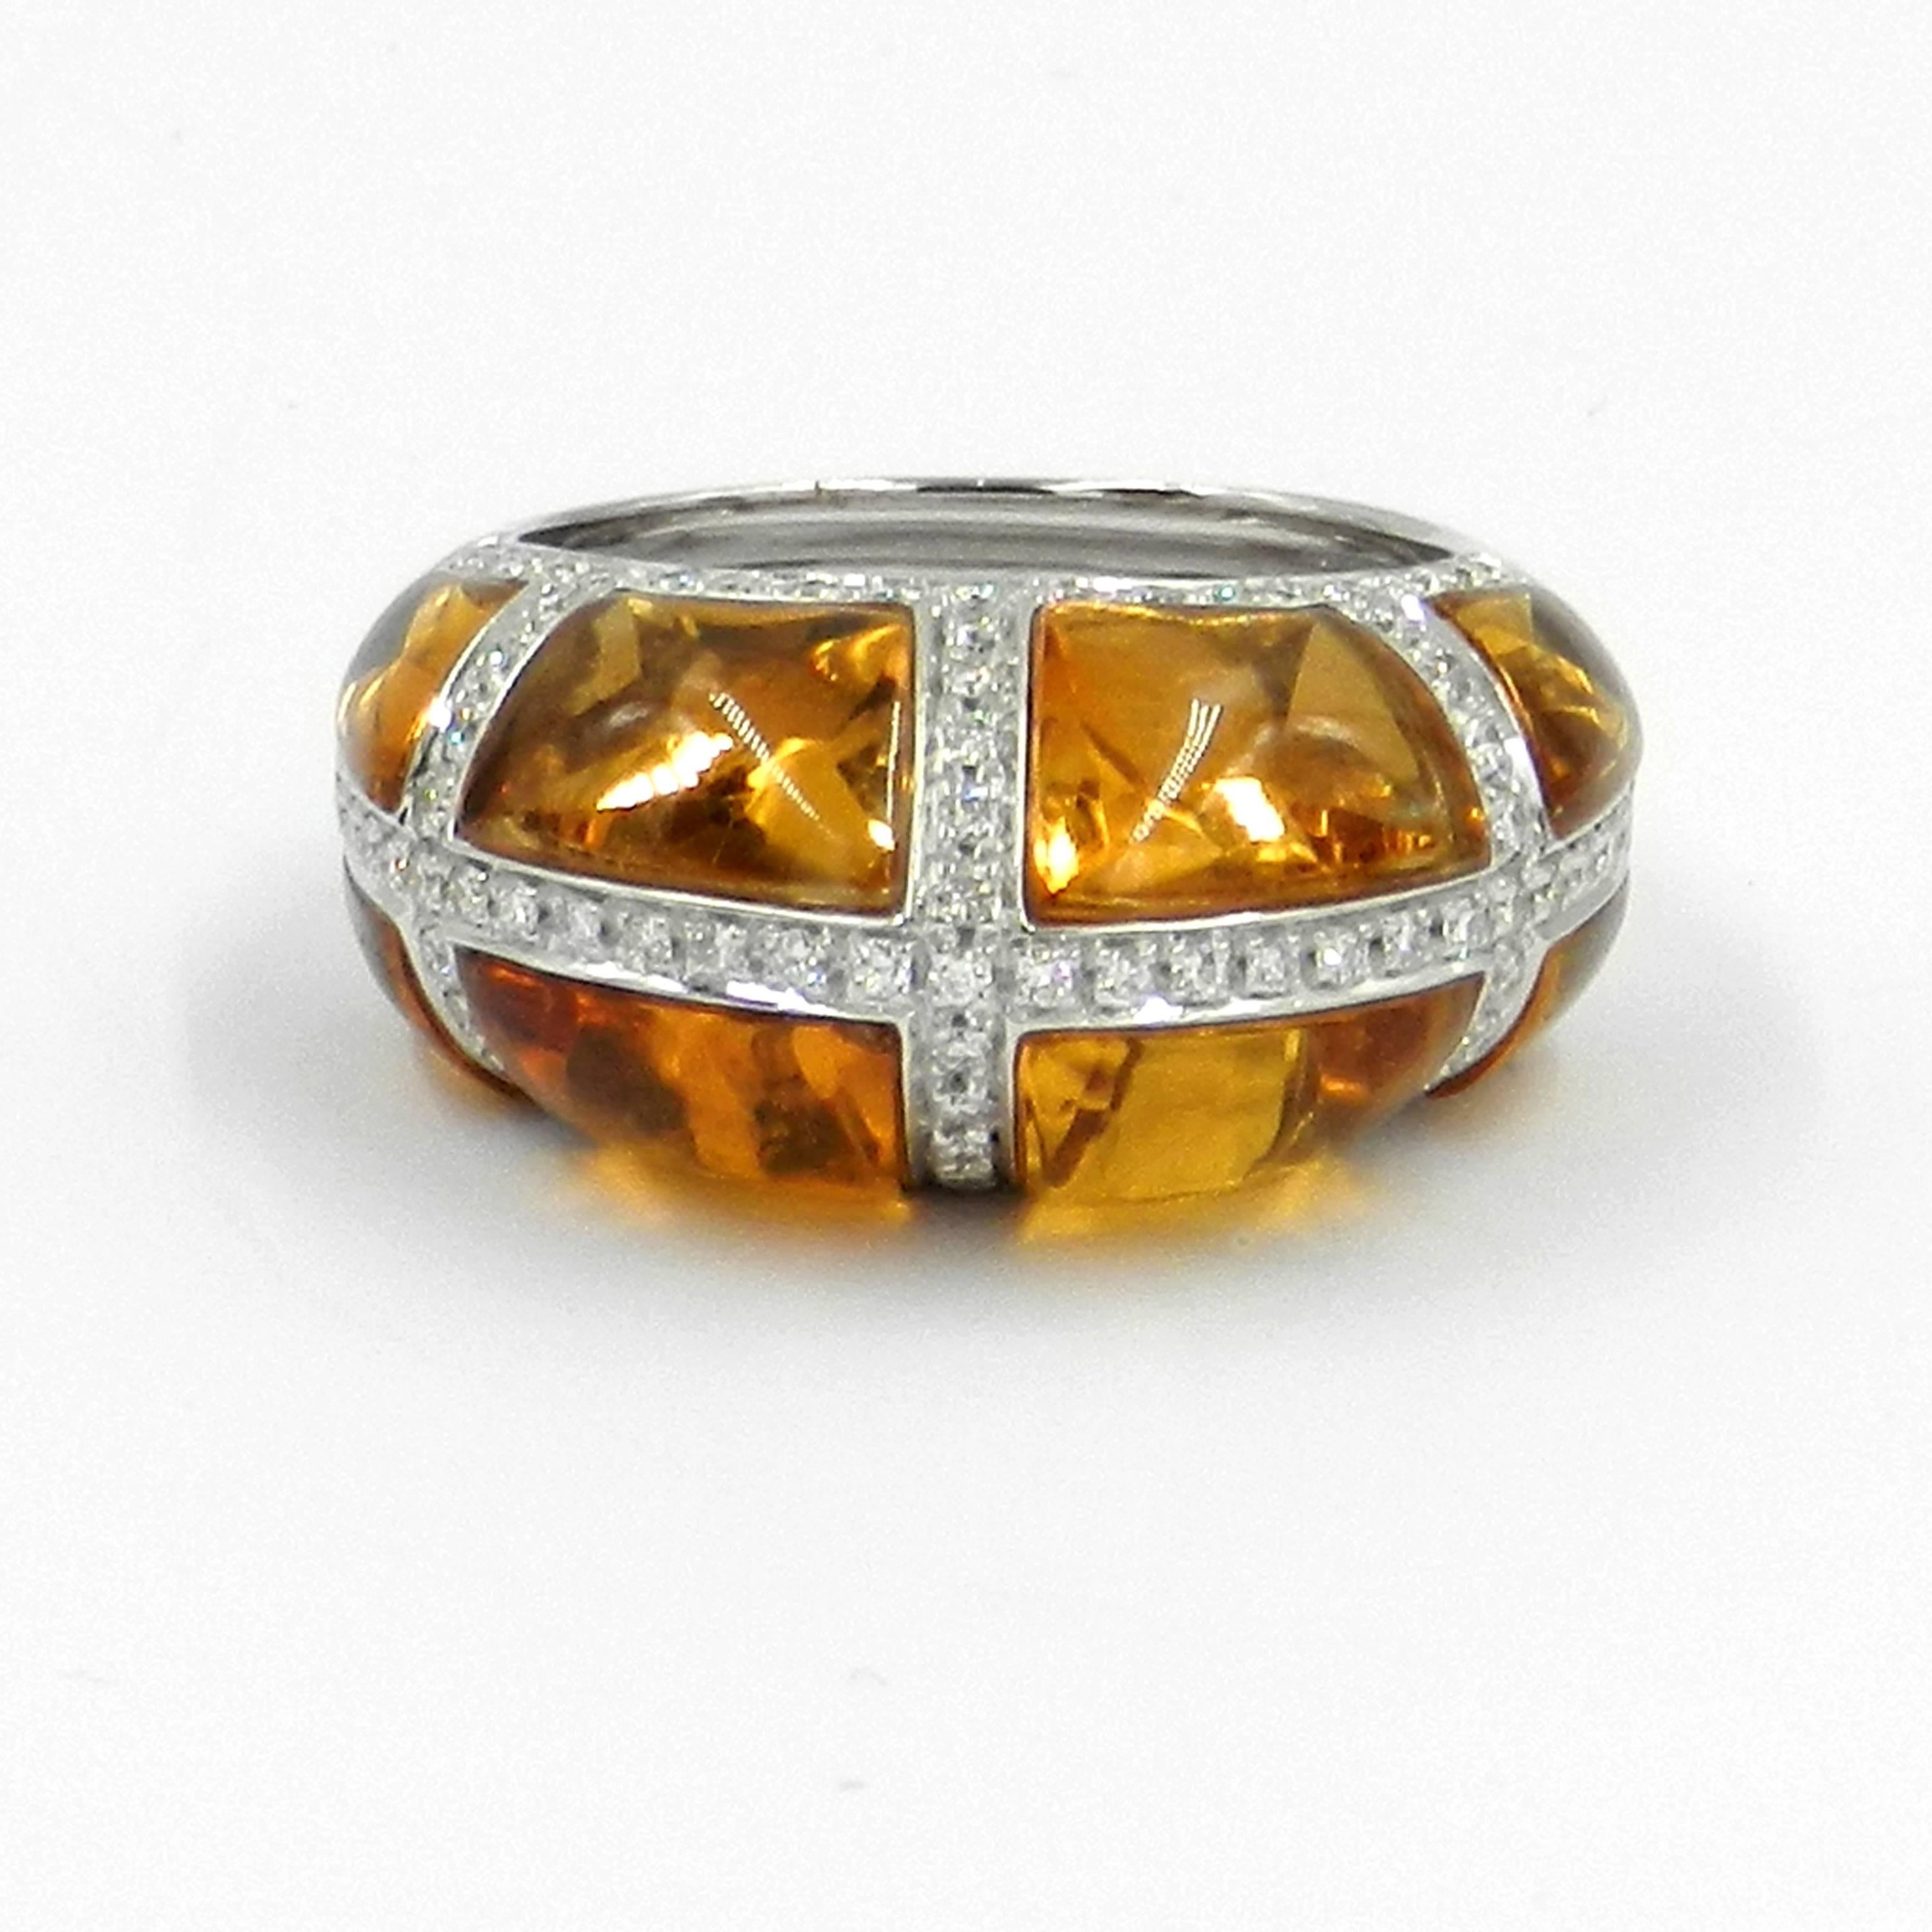 Round Cut Citrine and Diamonds Ring in 18 Karat White Gold Made by Garavelli, Italy For Sale